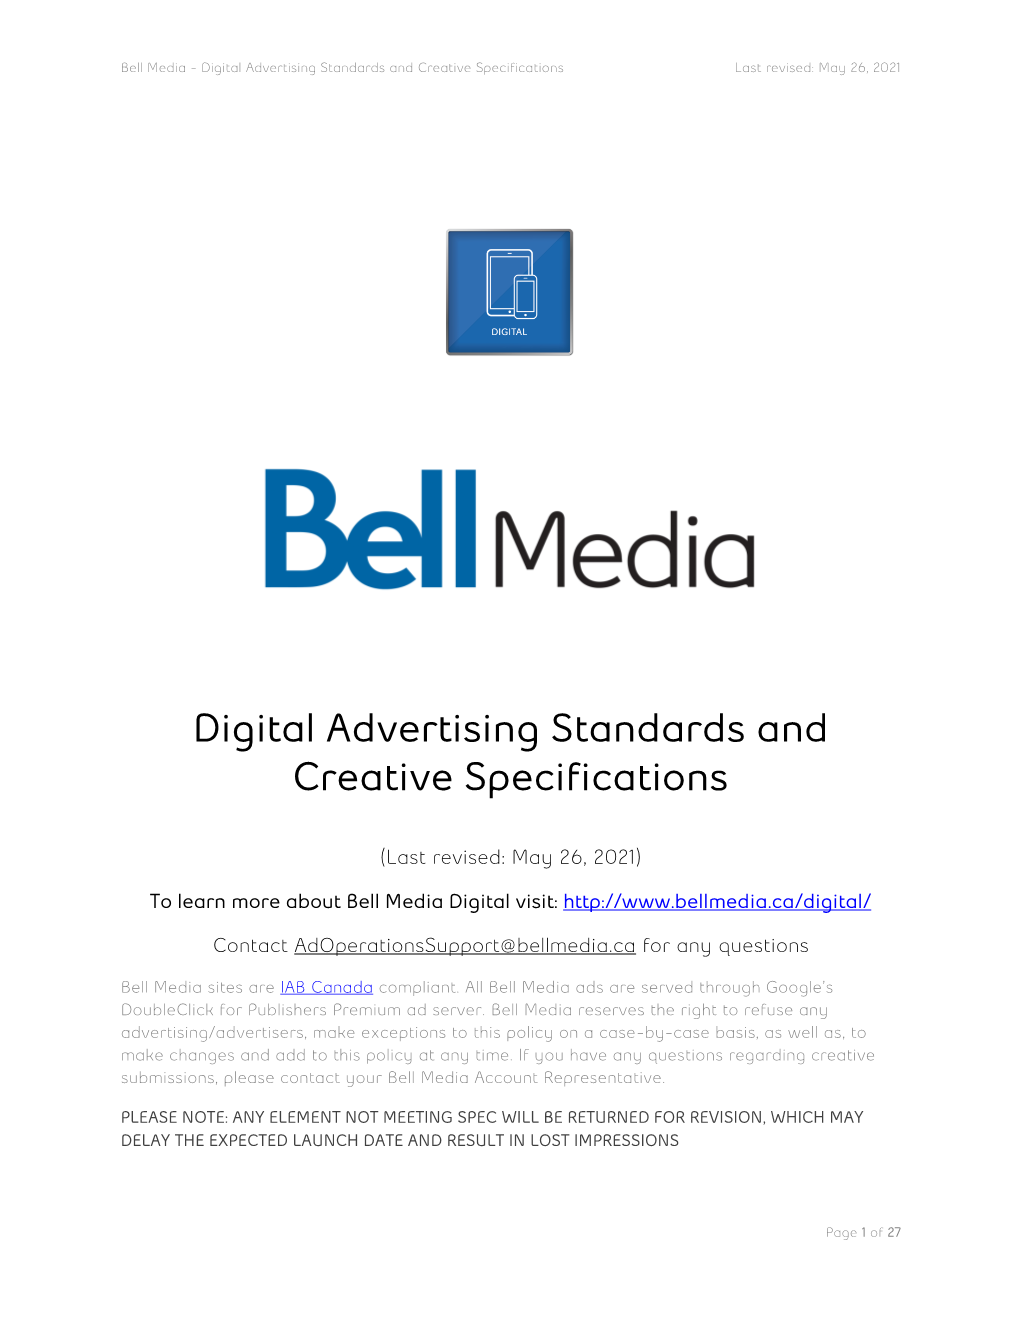 Digital Advertising Standards and Creative Specifications Last Revised: May 26, 2021